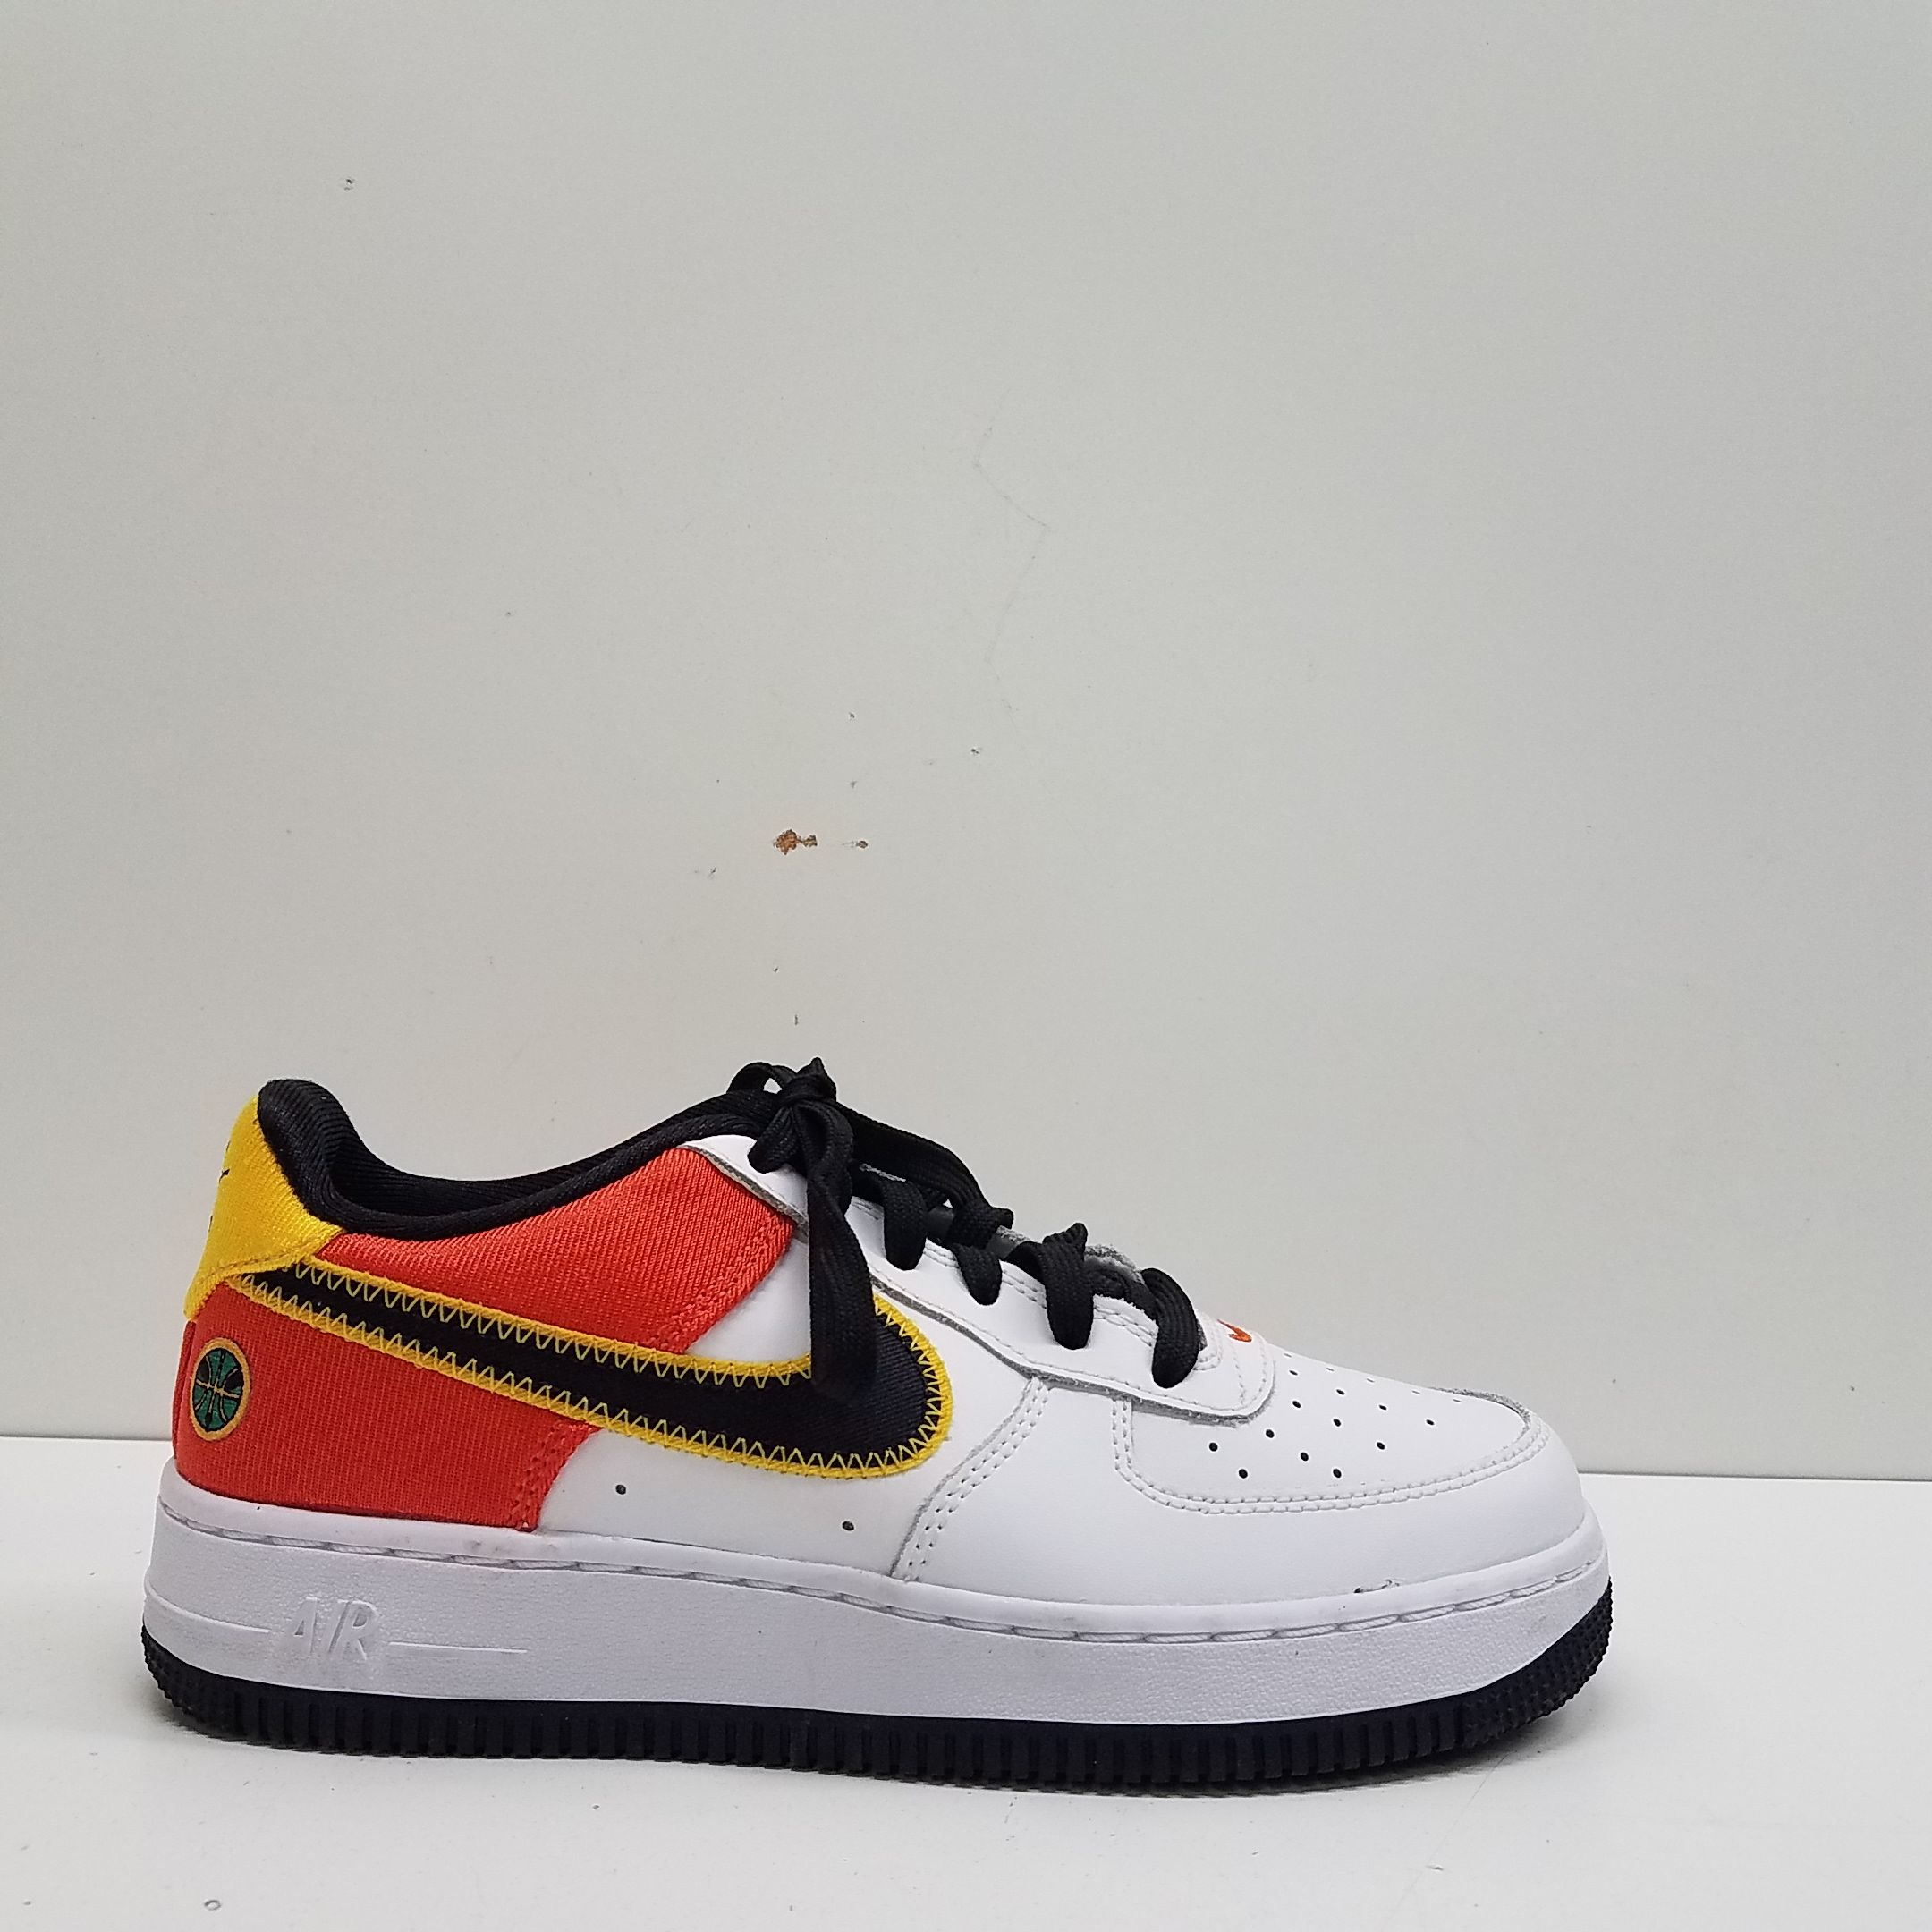 Buy the Nike Air Force 1 Low LV8 PS Roswell Raygun White Orange DD9530-100  sz 5.5Y / 7 W